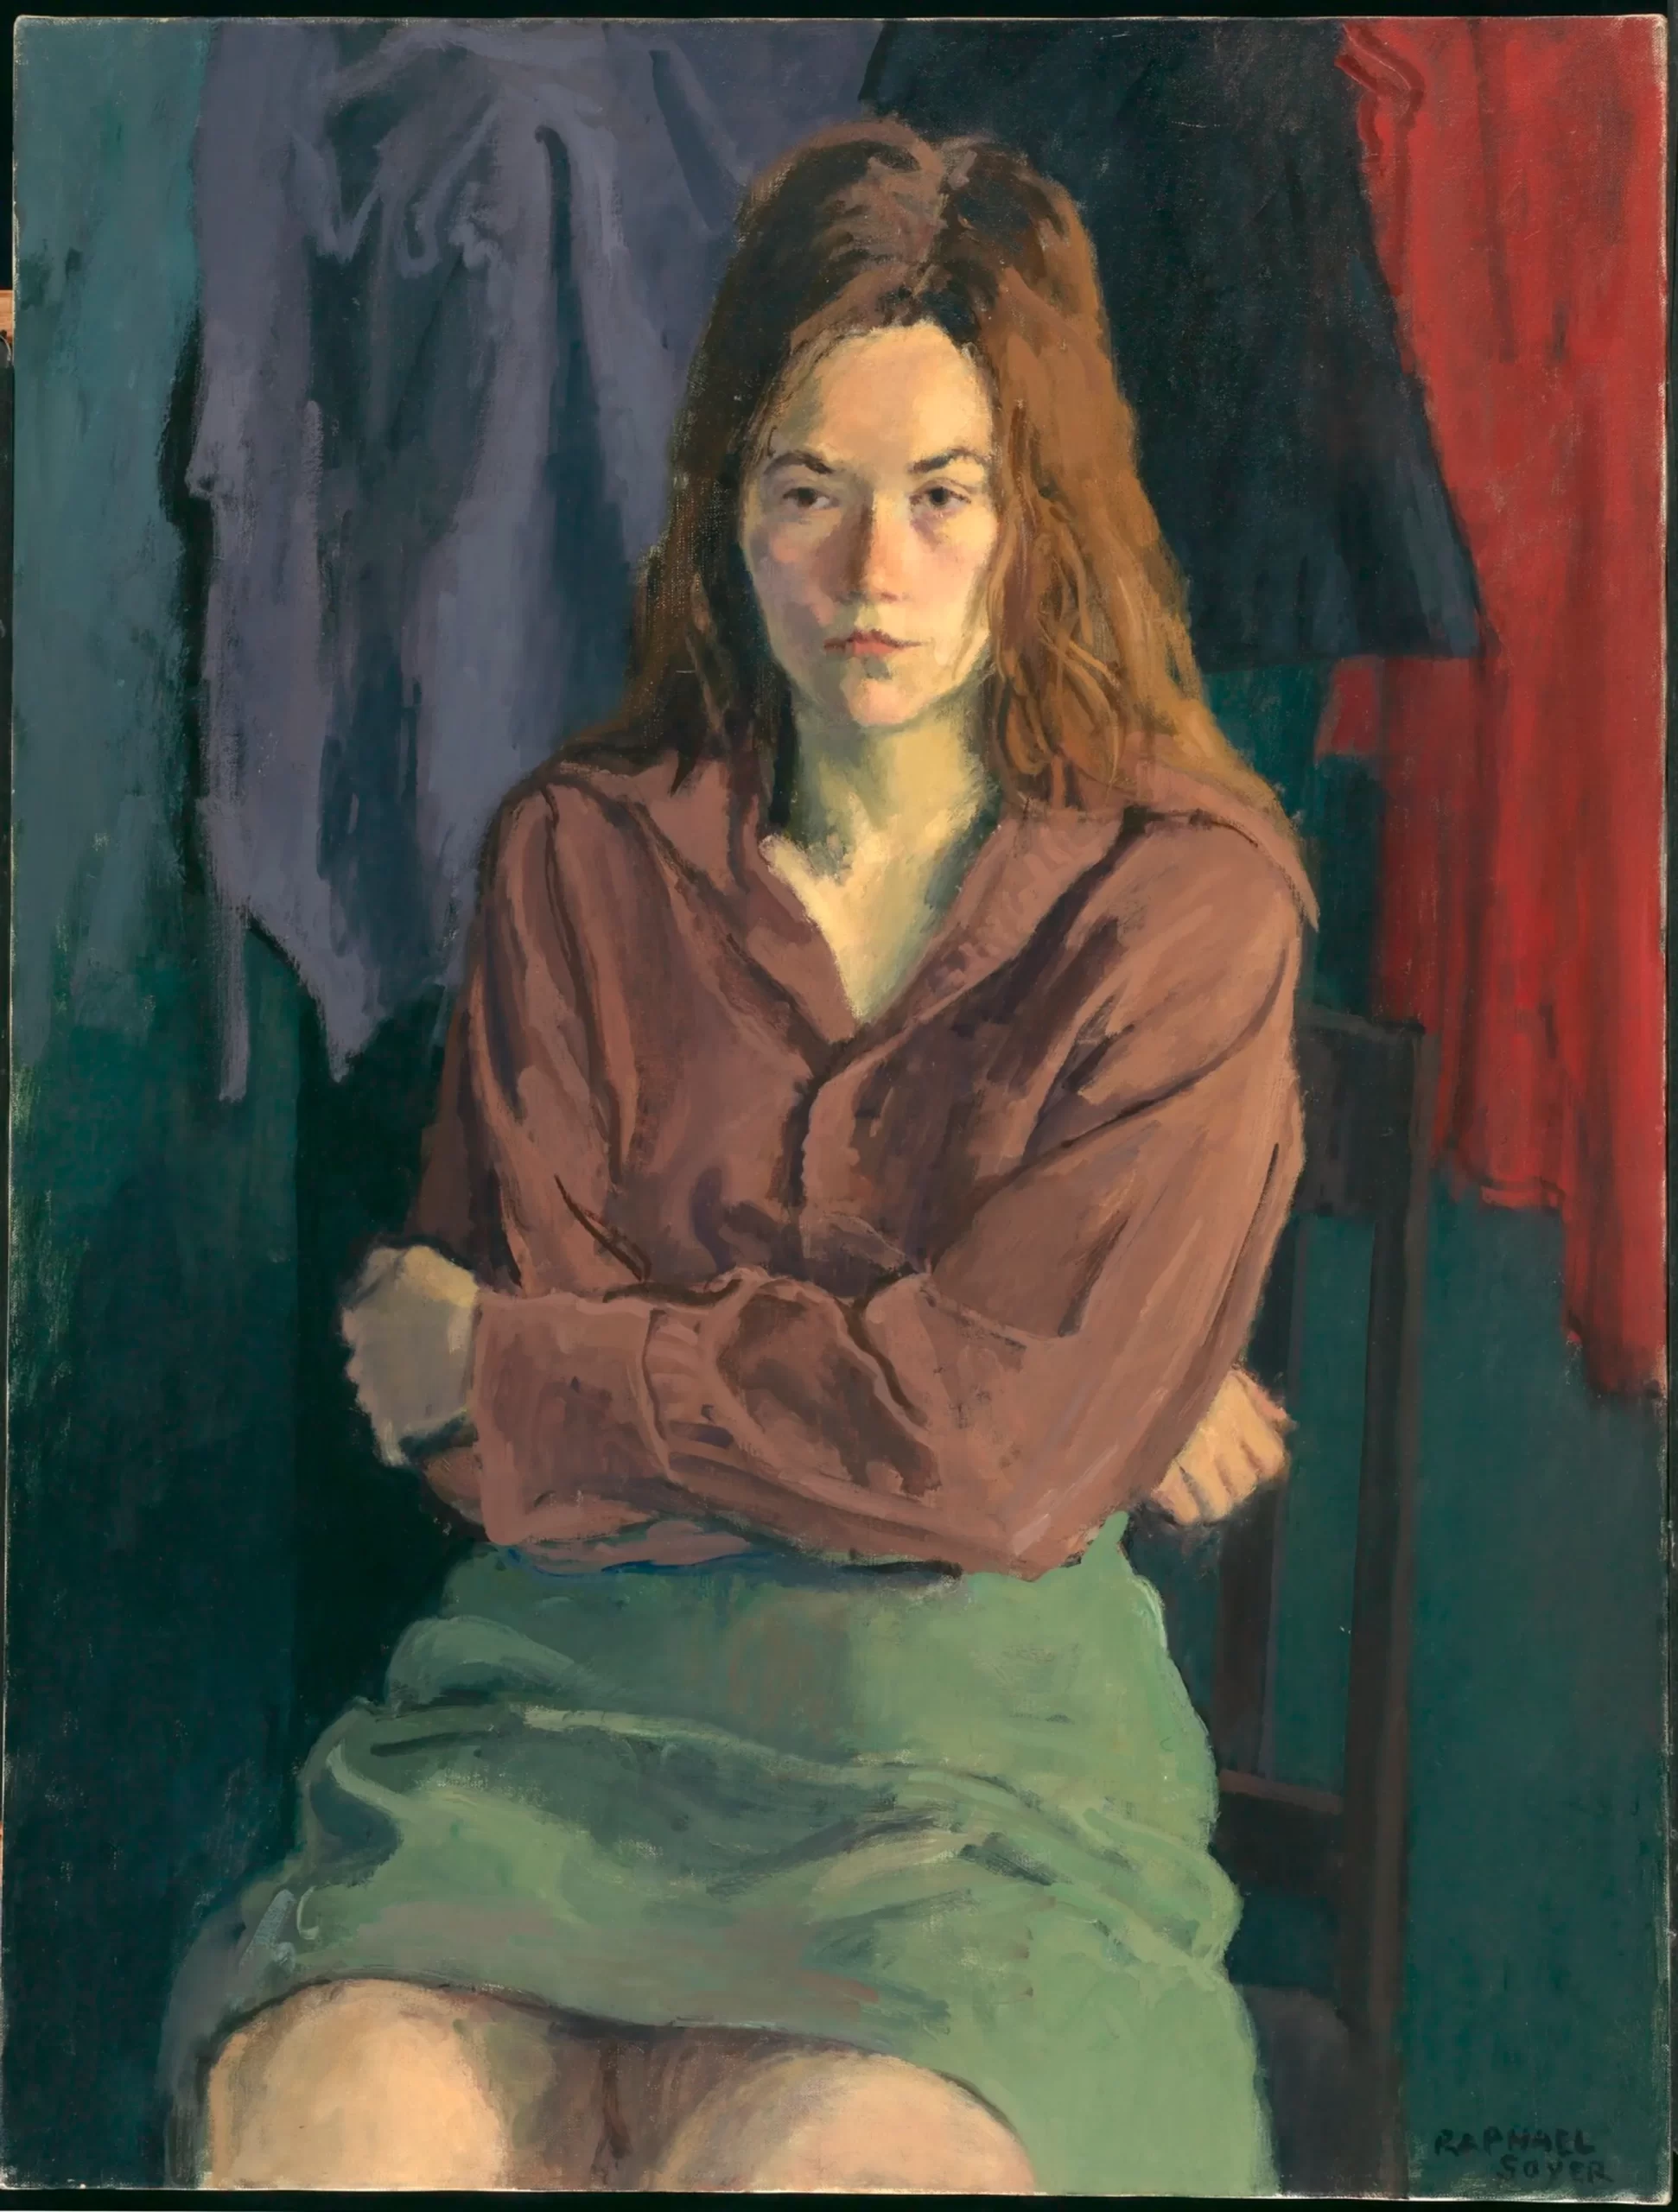 Raphael Soyer, Rosemary in Thought, 1975. Oil on canvas, 34 x 26 inches. Smithsonian American Art Museum, Bequest of Henry Ward Ranger through the National Academy of Design, 1999.77.